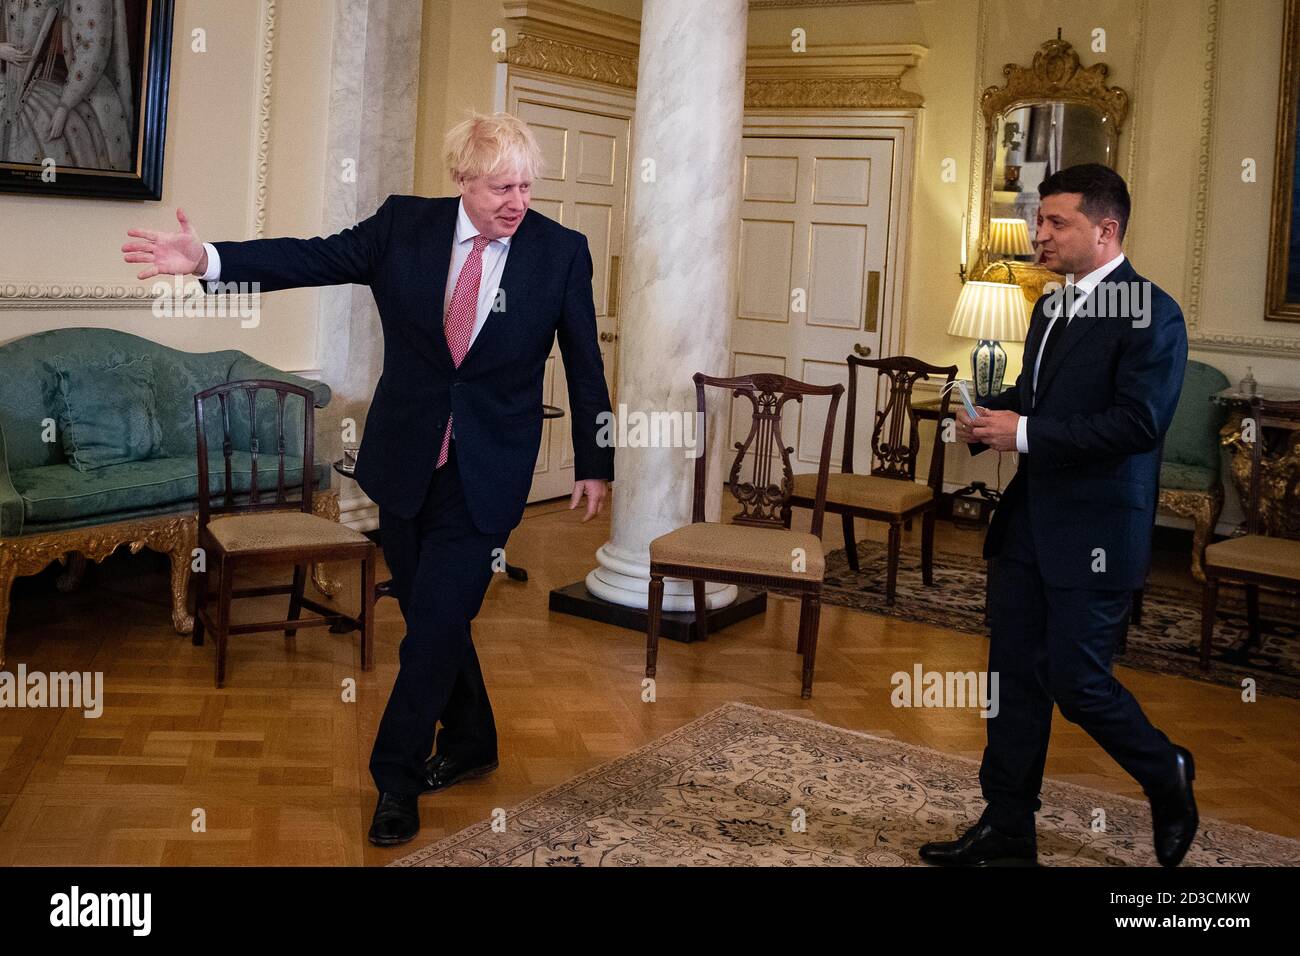 Prime Minister Boris Johnson welcomes the President of Ukraine, Volodymyr Zelenskyy, to Downing Street , London, ahead of a meeting to sign a strategic partnership deal with the president in the face of Russia's 'destabilising behaviour' towards the country. Stock Photo